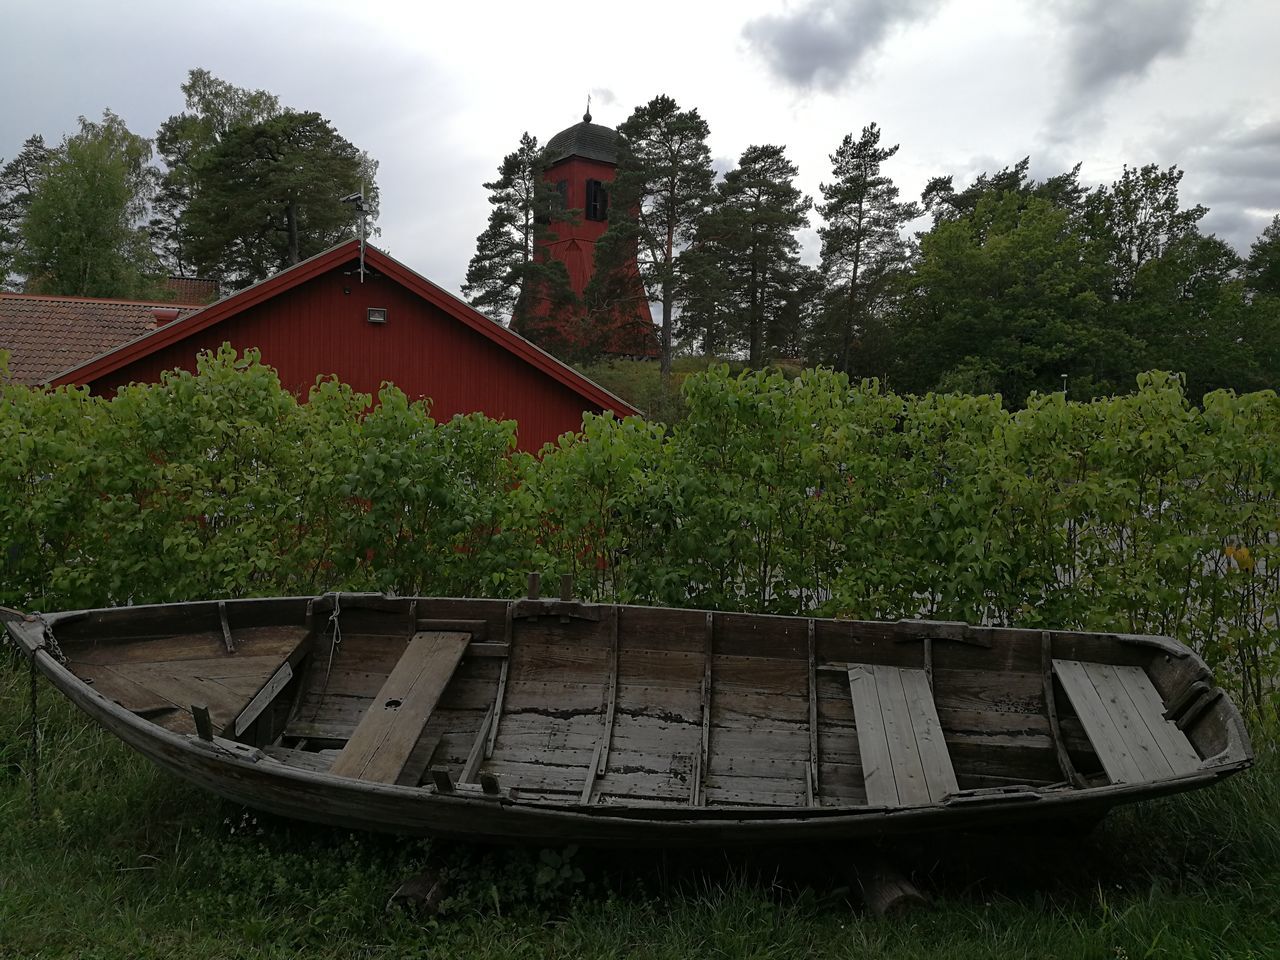 A old boat